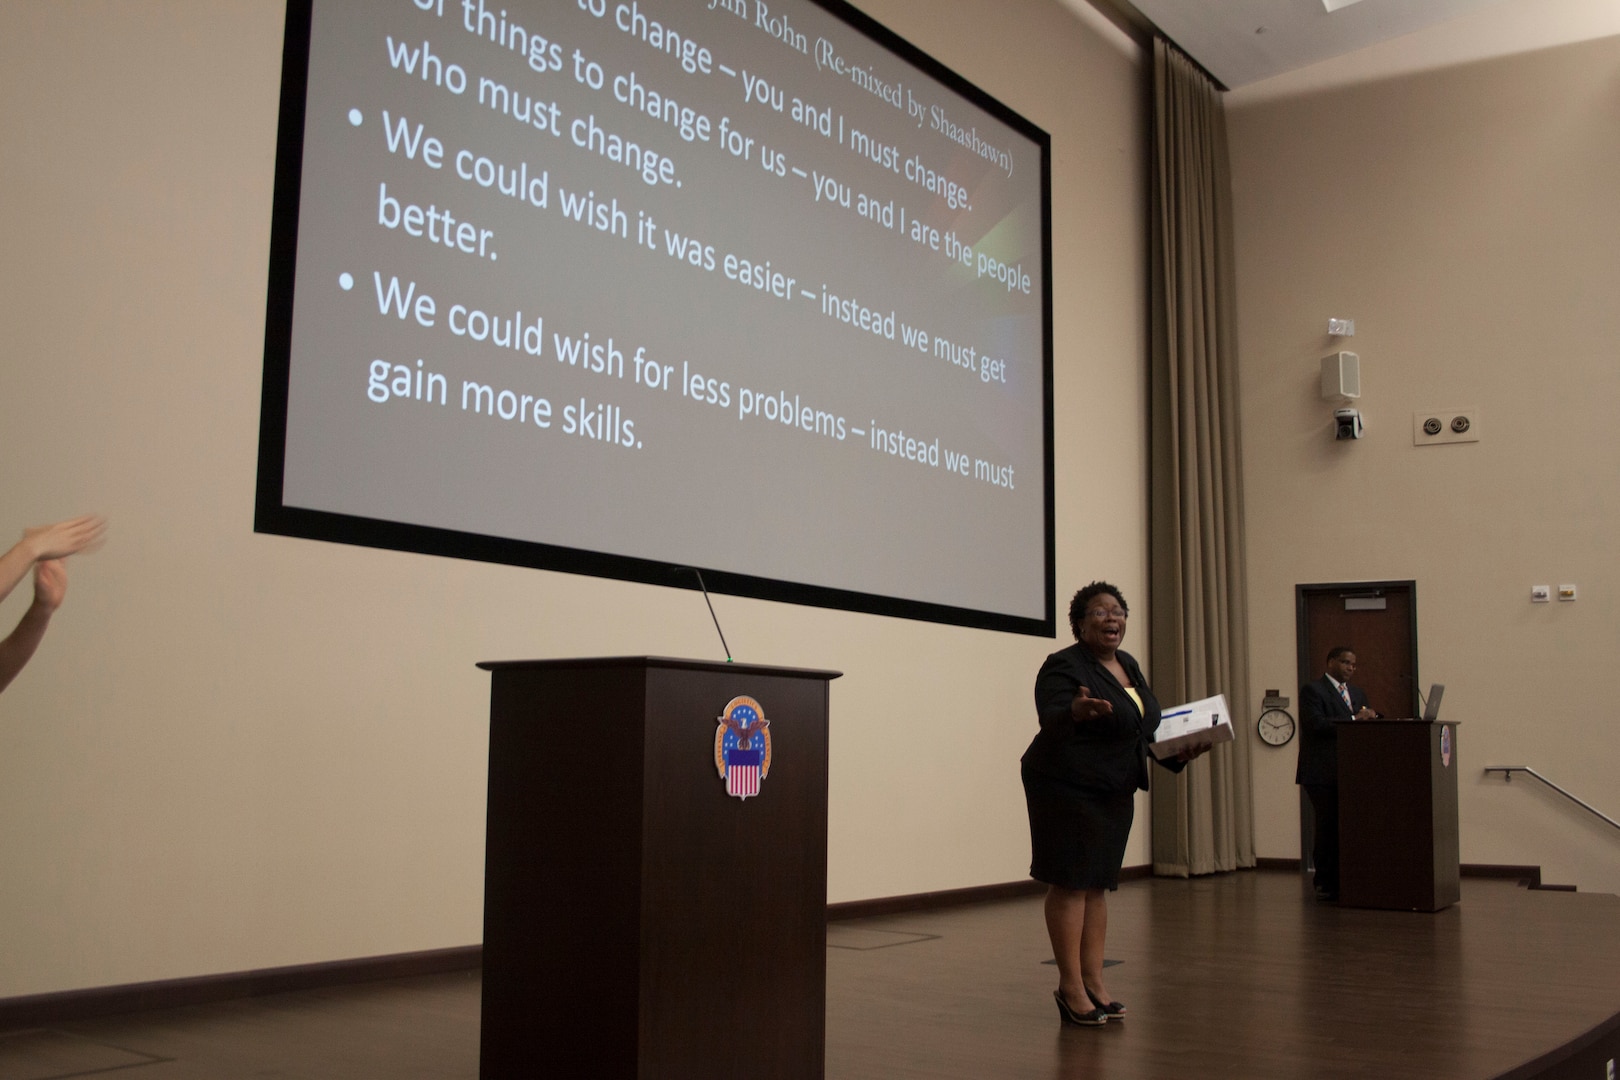 Shaashawn Dial-Snowden, the president of the Board of Directors for the LGBT Center of Central Pennsylvania speaks on the importance of inclusion during the DLA Distribution’s Multicultural Committee’s Lesbian, Gay, Bisexual and Transgender Pride Month program on June 21.